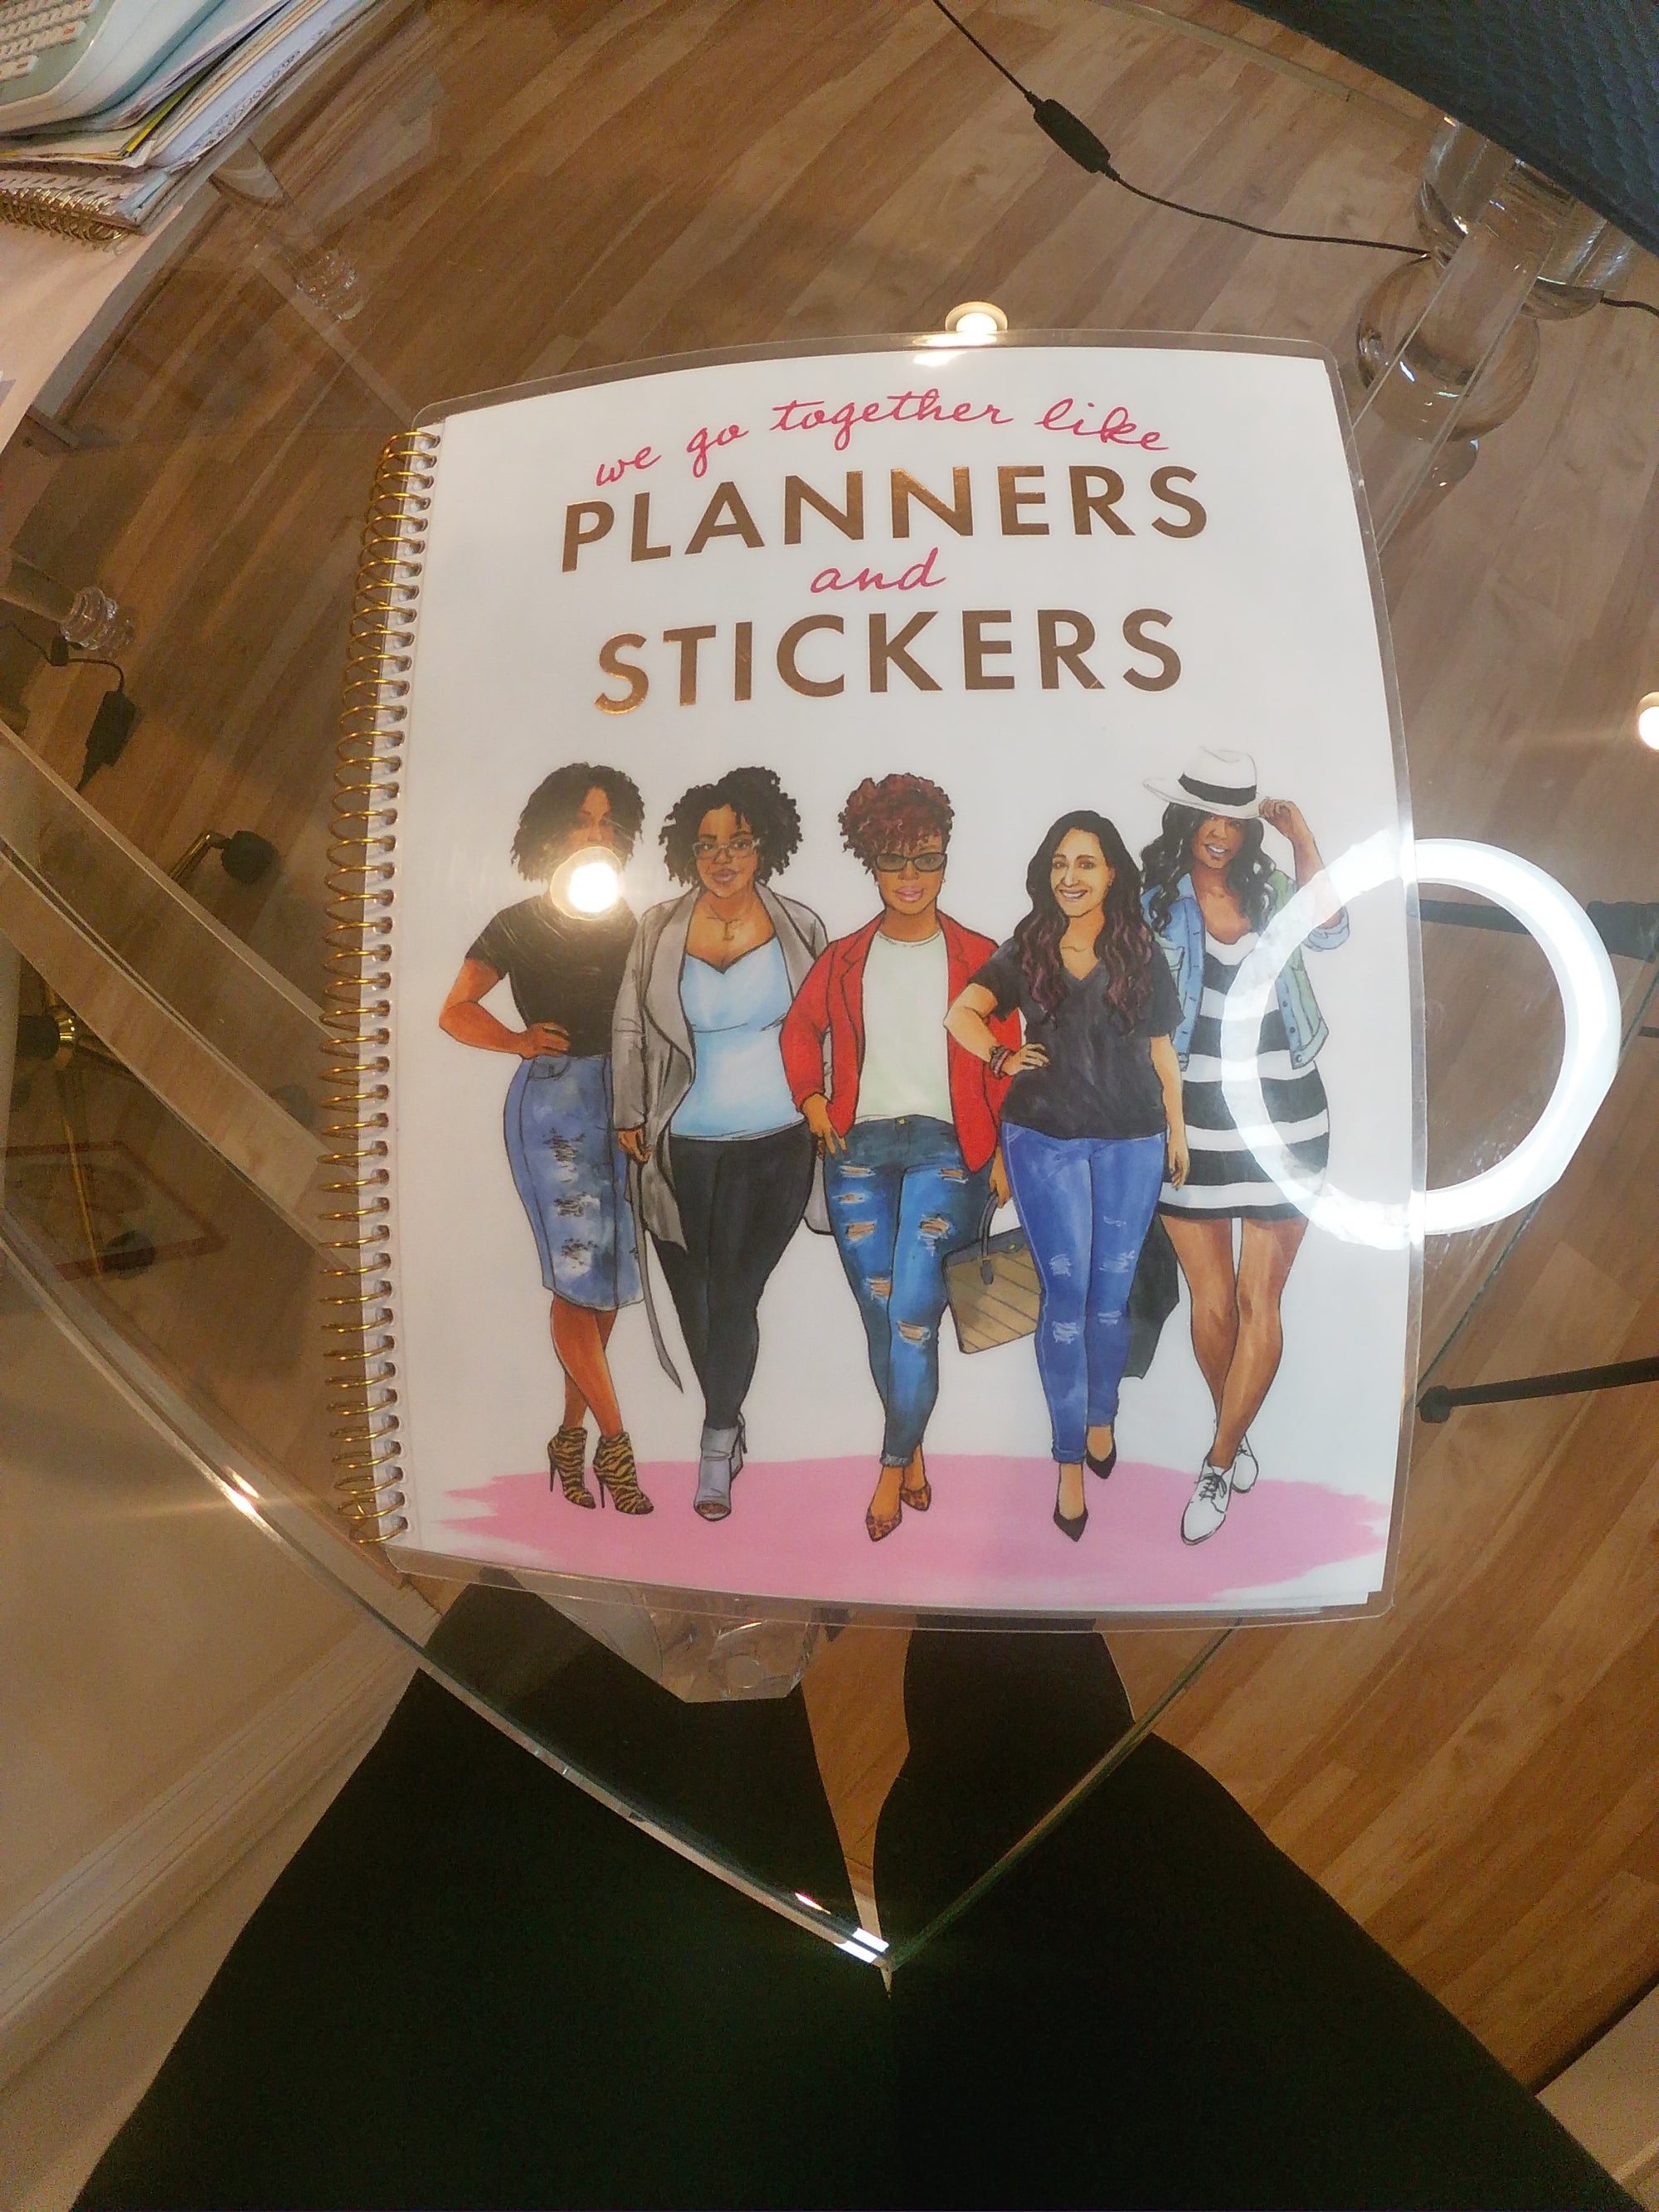 Diverse African American Women Planners and Stickers Album